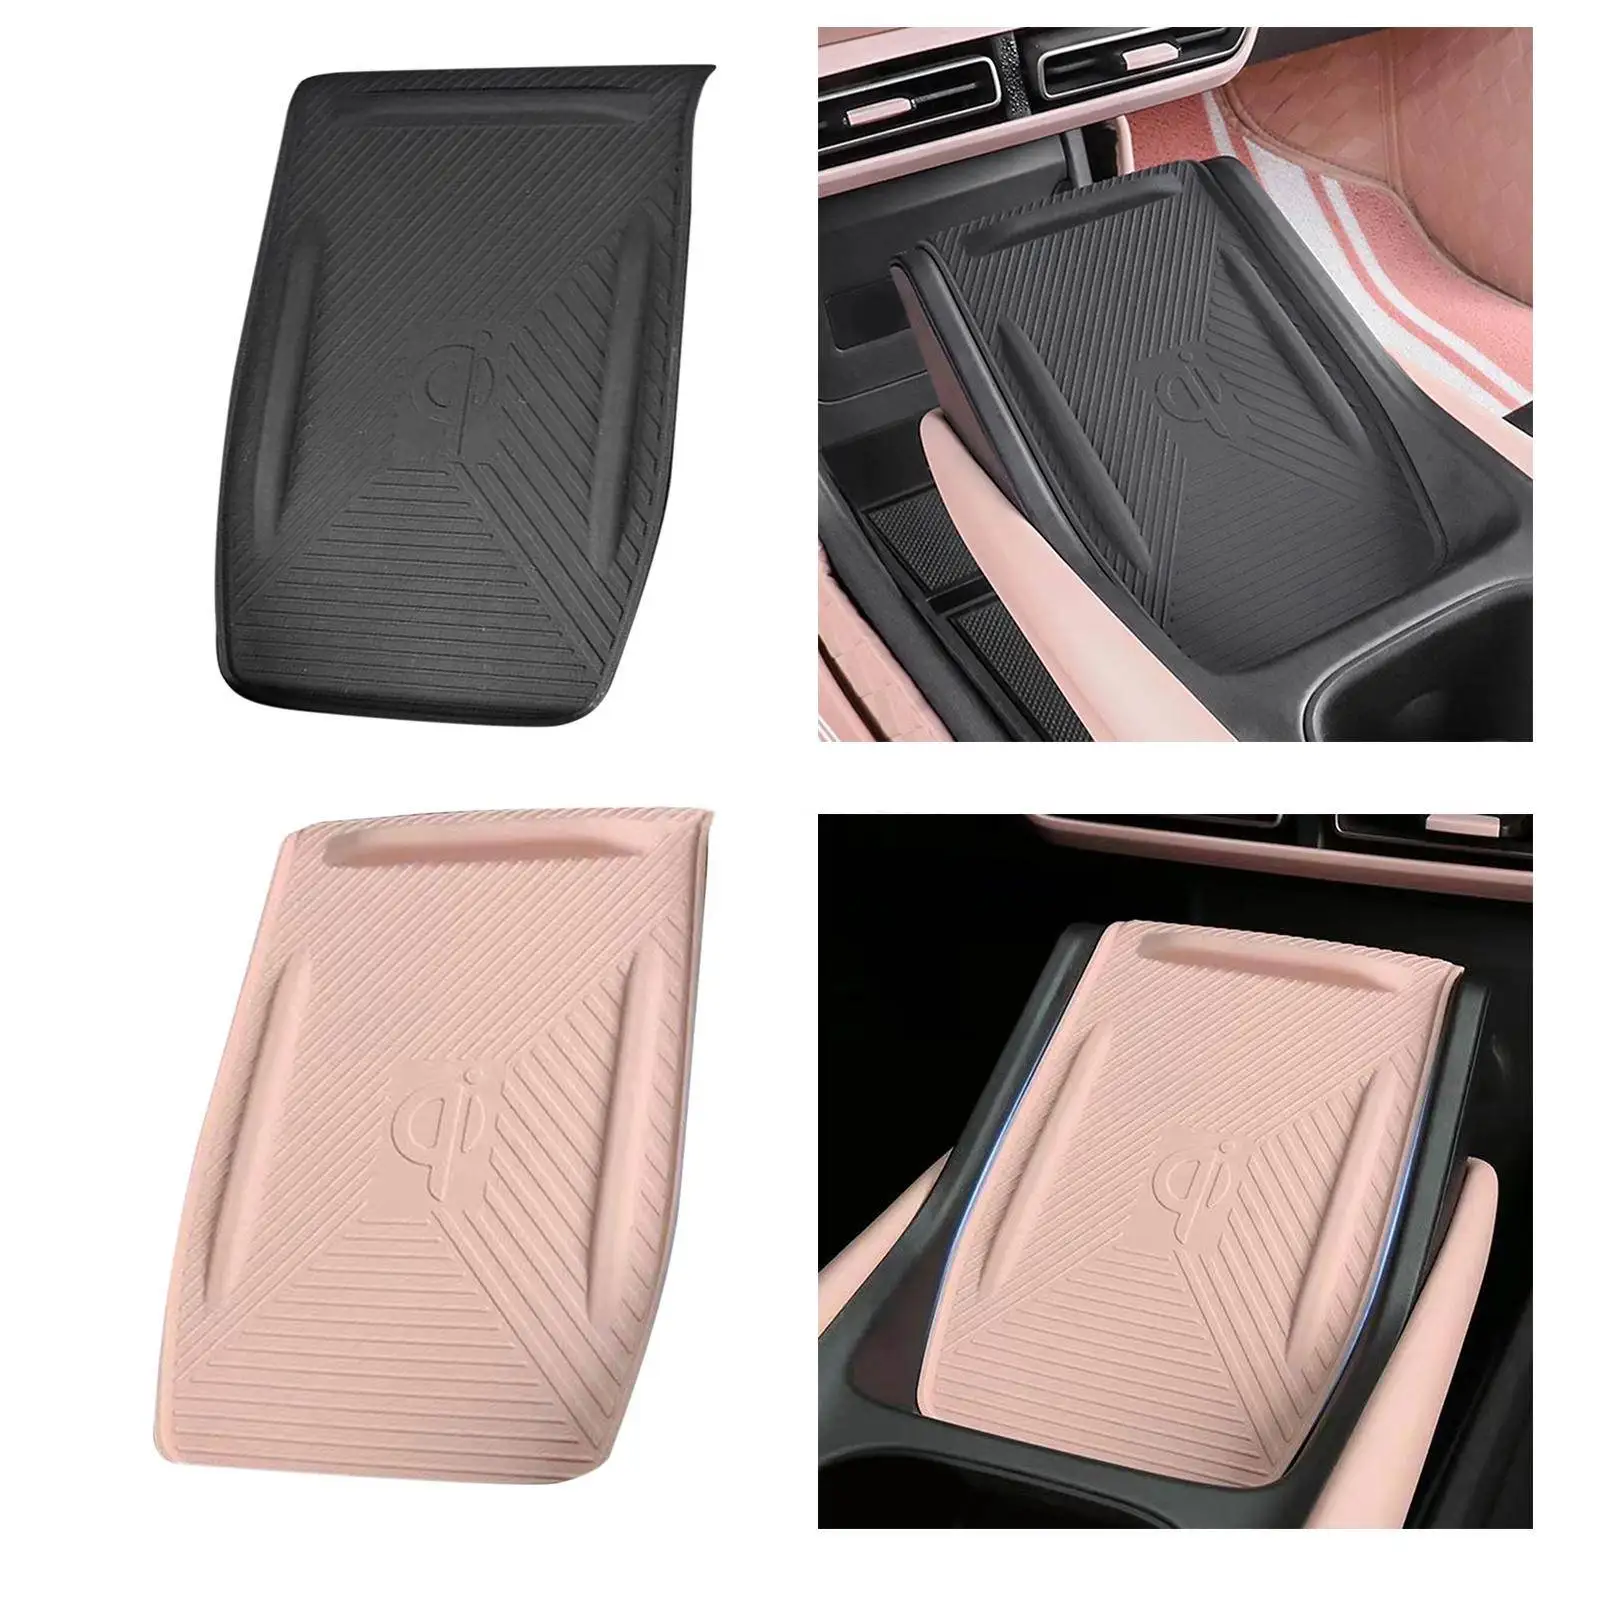 Car center console charging mat, silicone, washable, non-slip mat for